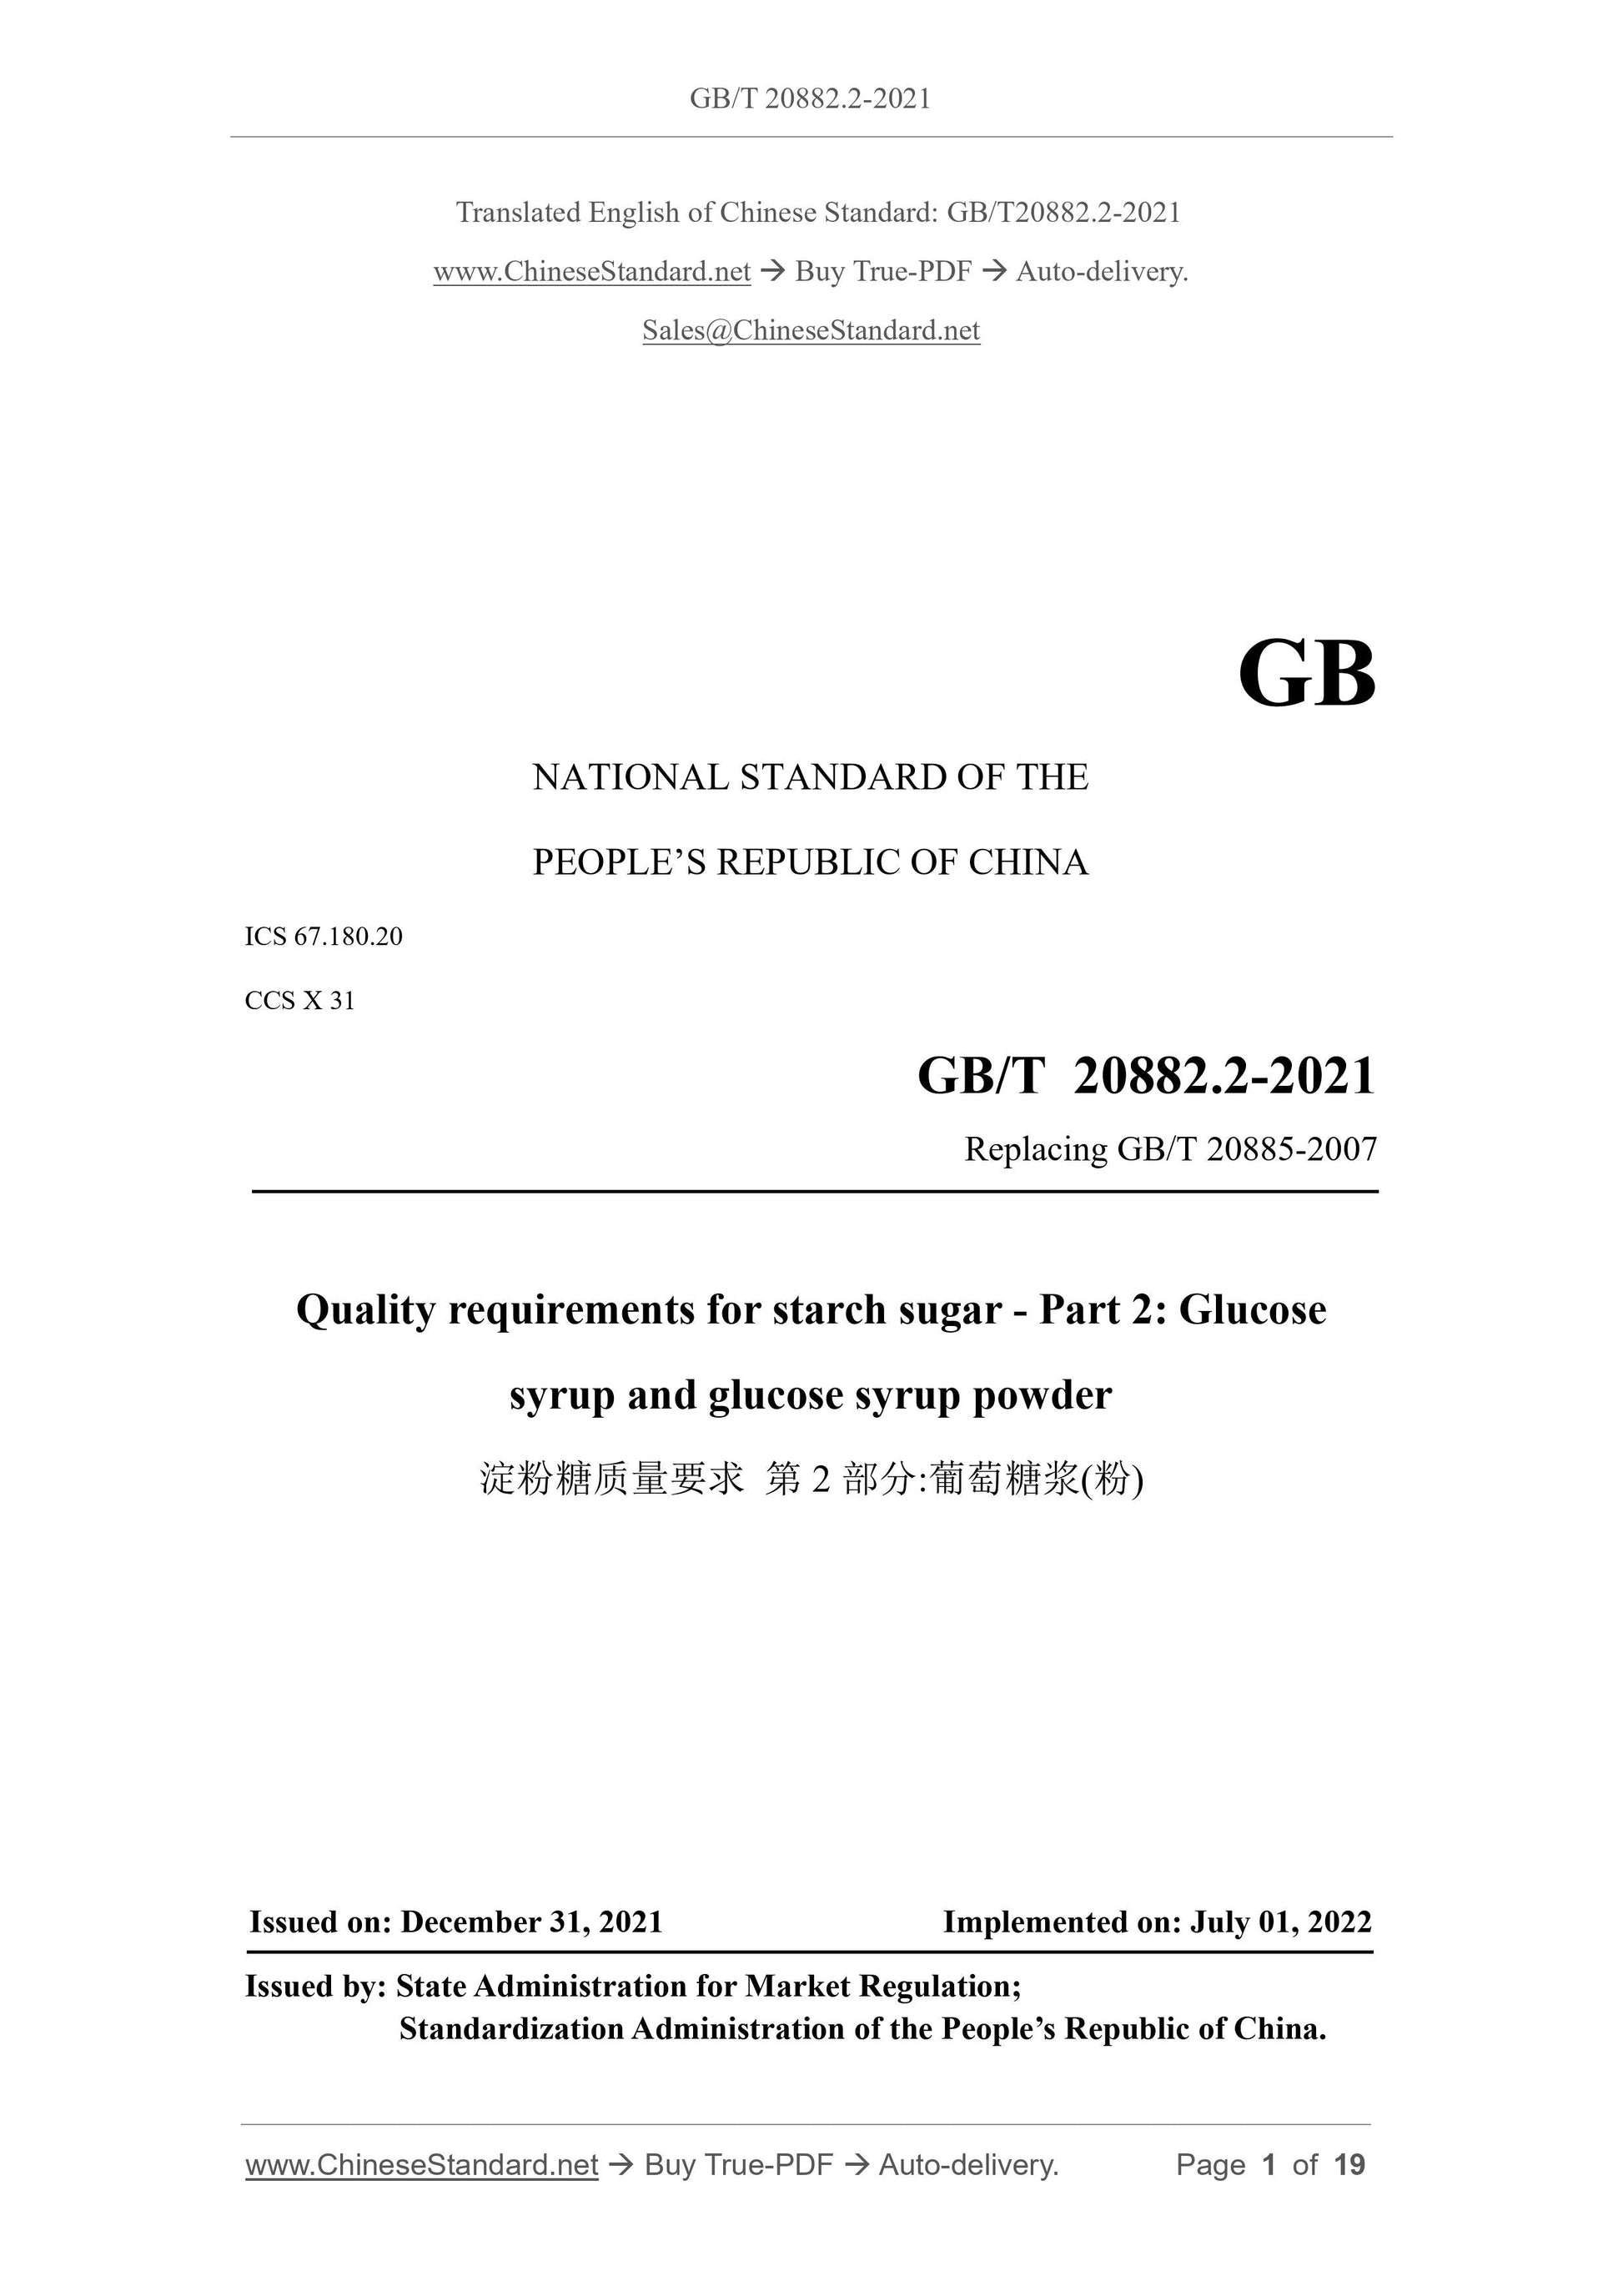 GB/T 20882.2-2021 Page 1